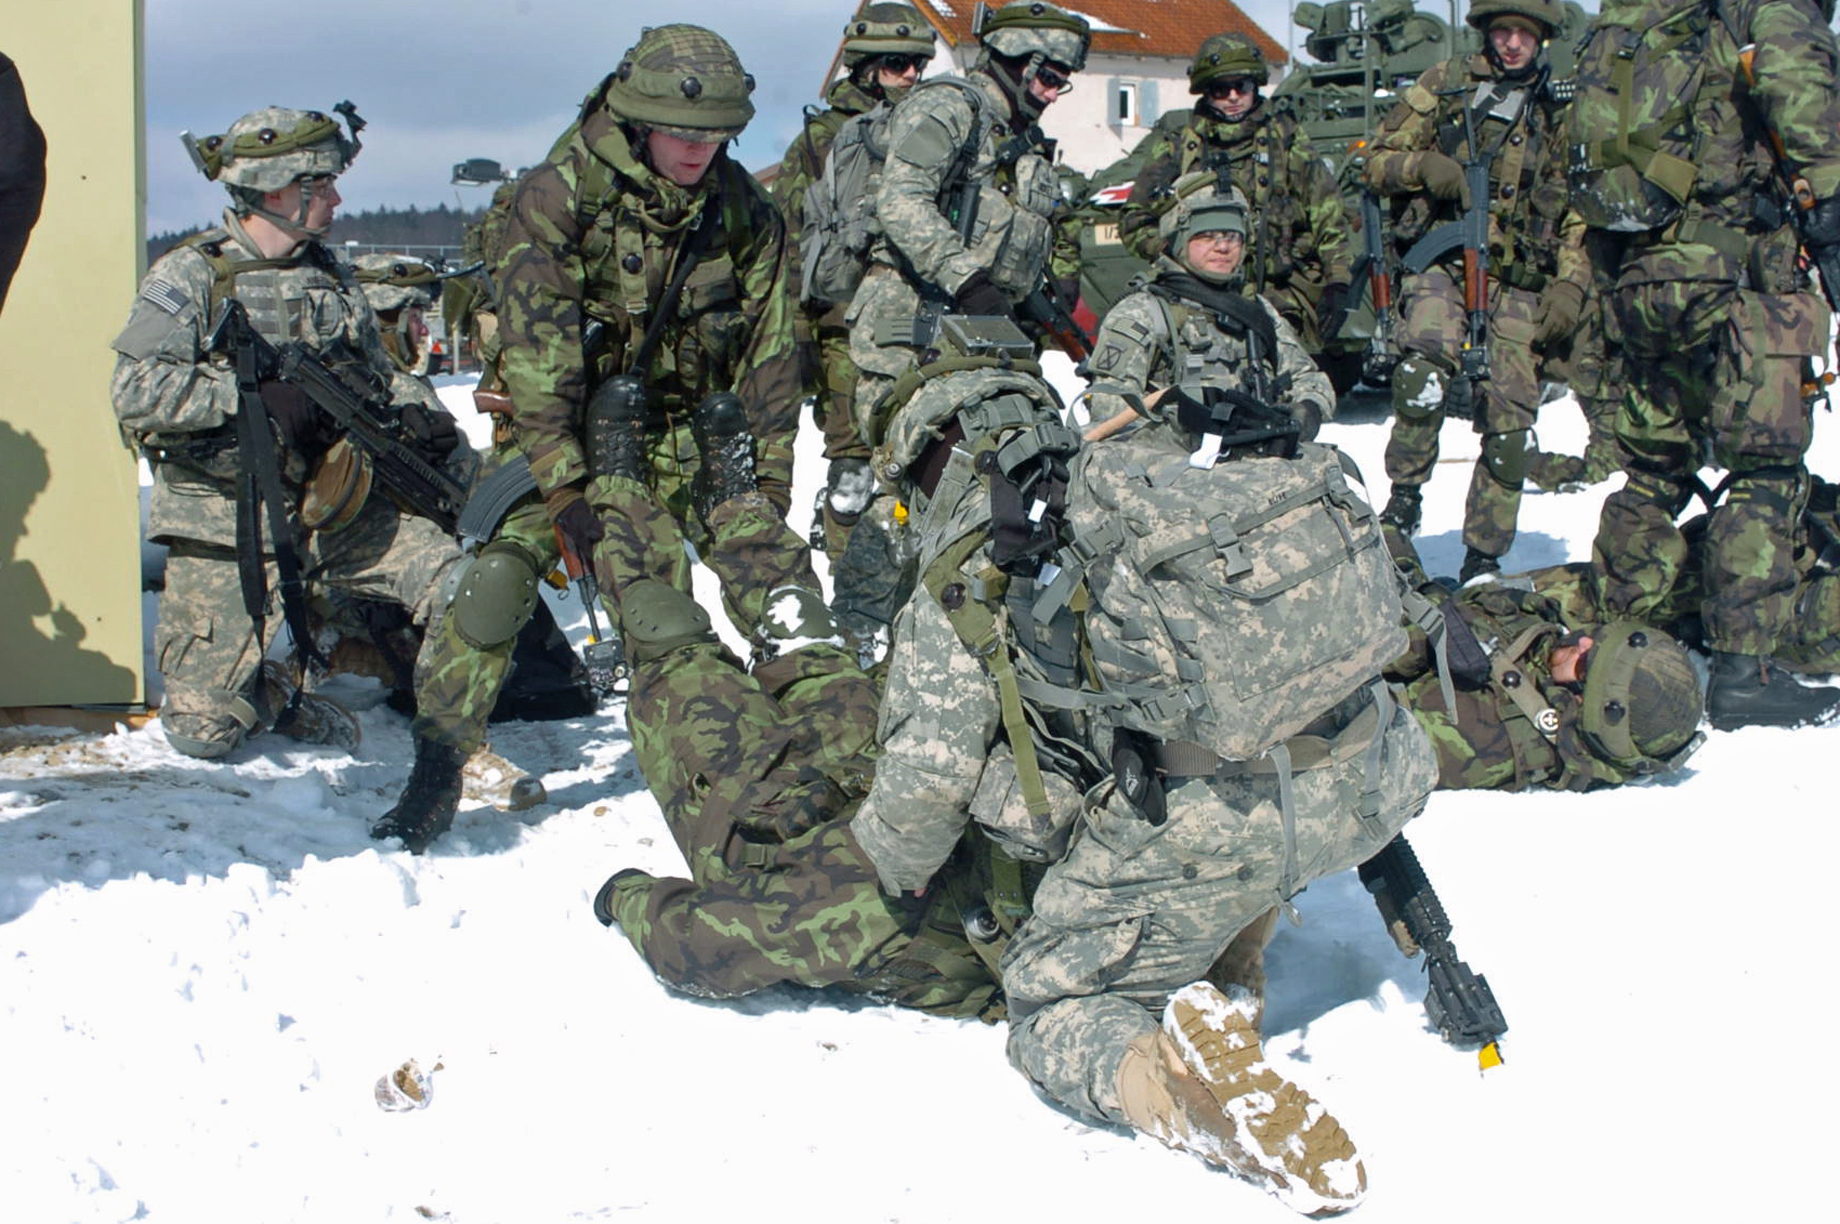 there are soldiers that are kneeling in the snow